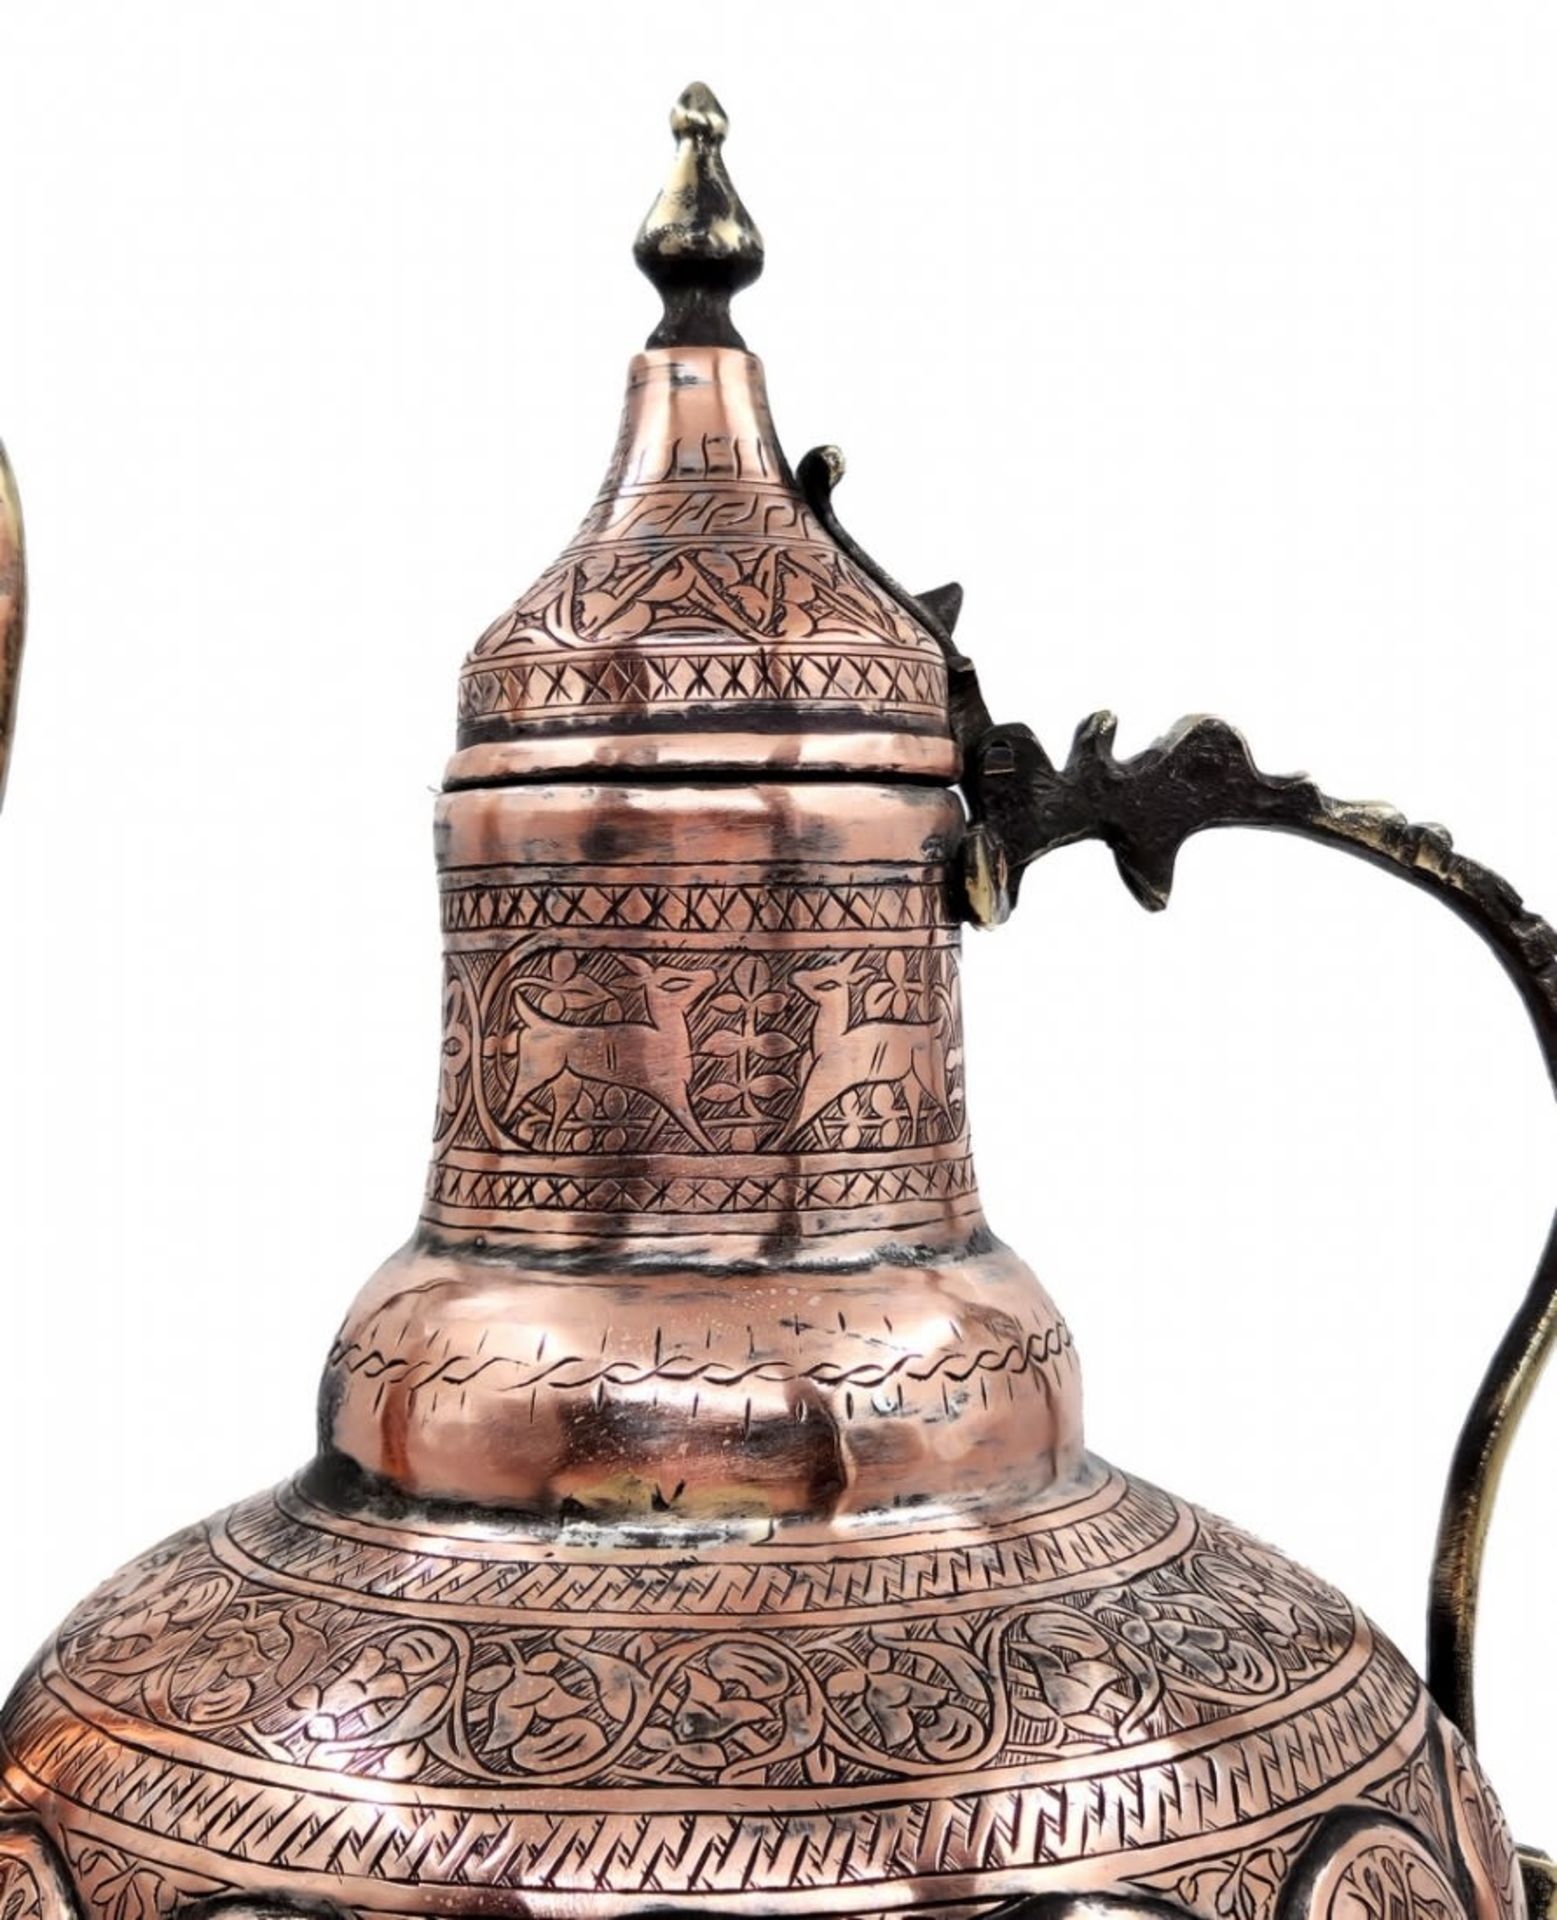 An antique Persian vessel, from the Qajar Dynasty period, made of copper and brass and decorated - Image 6 of 9